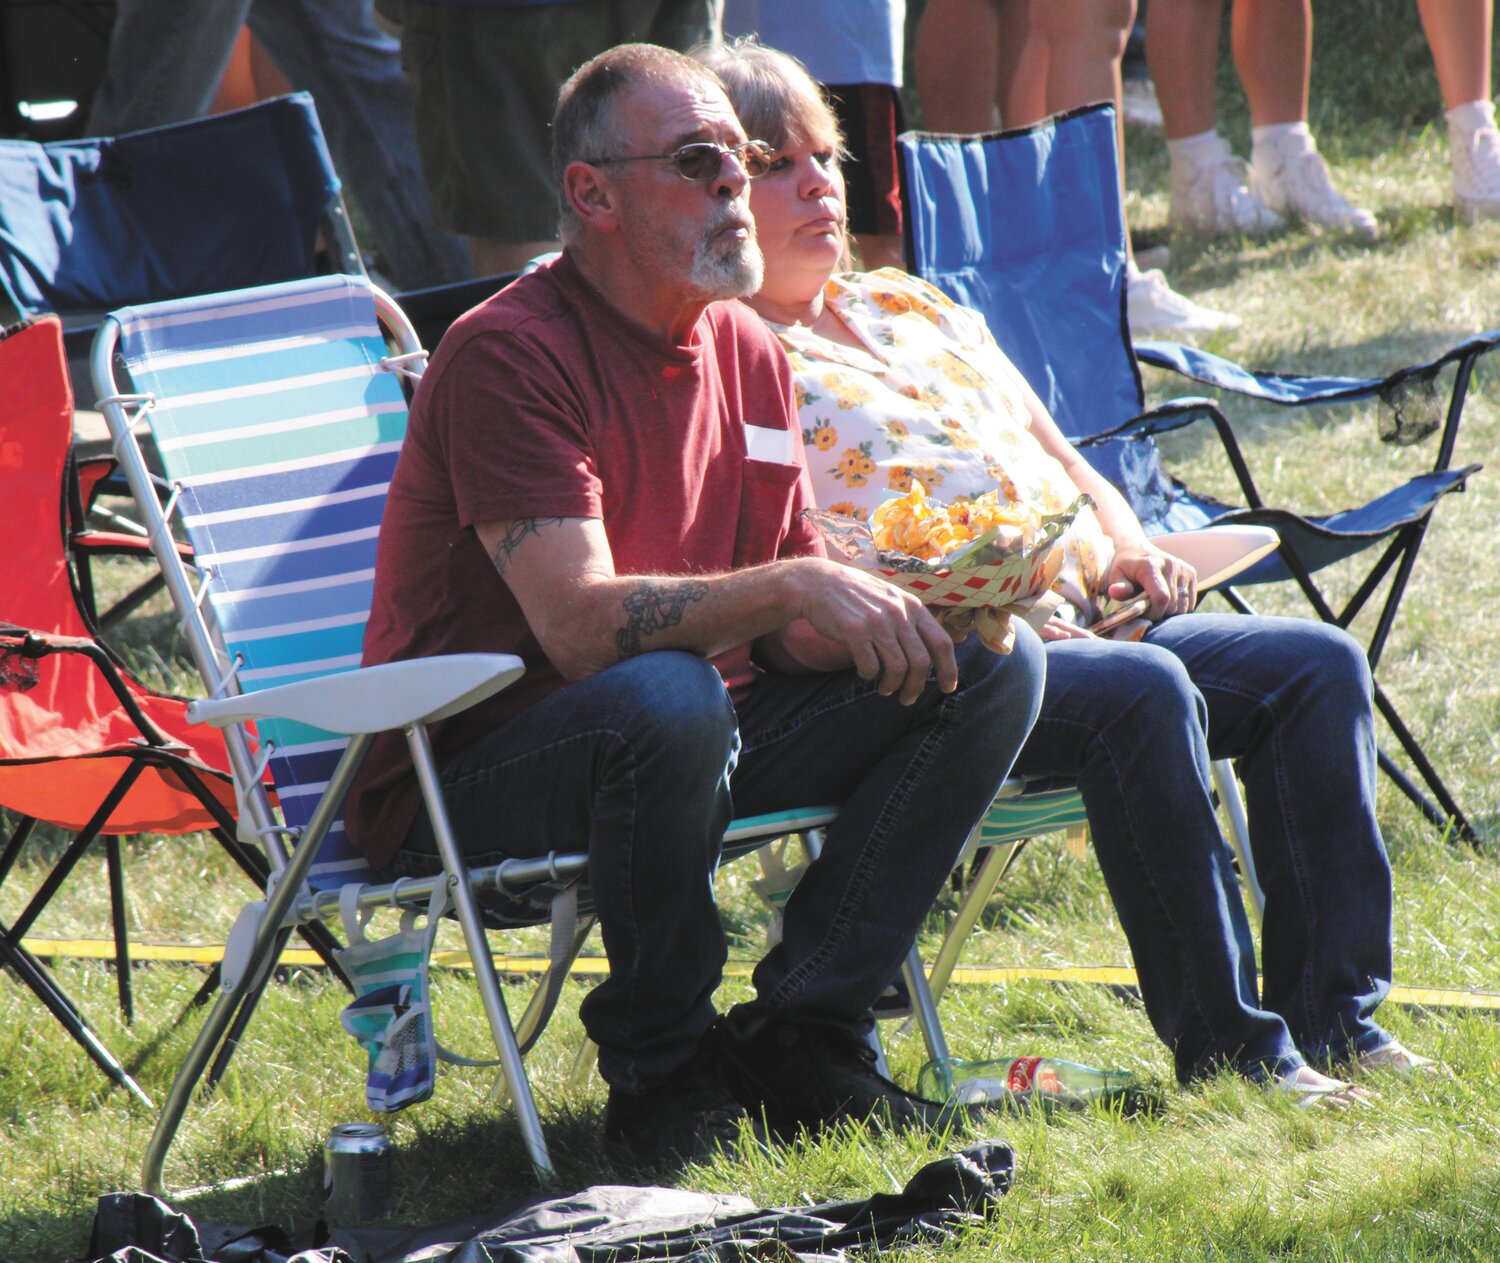 Festival food and entertainment draw big crowds Friday.